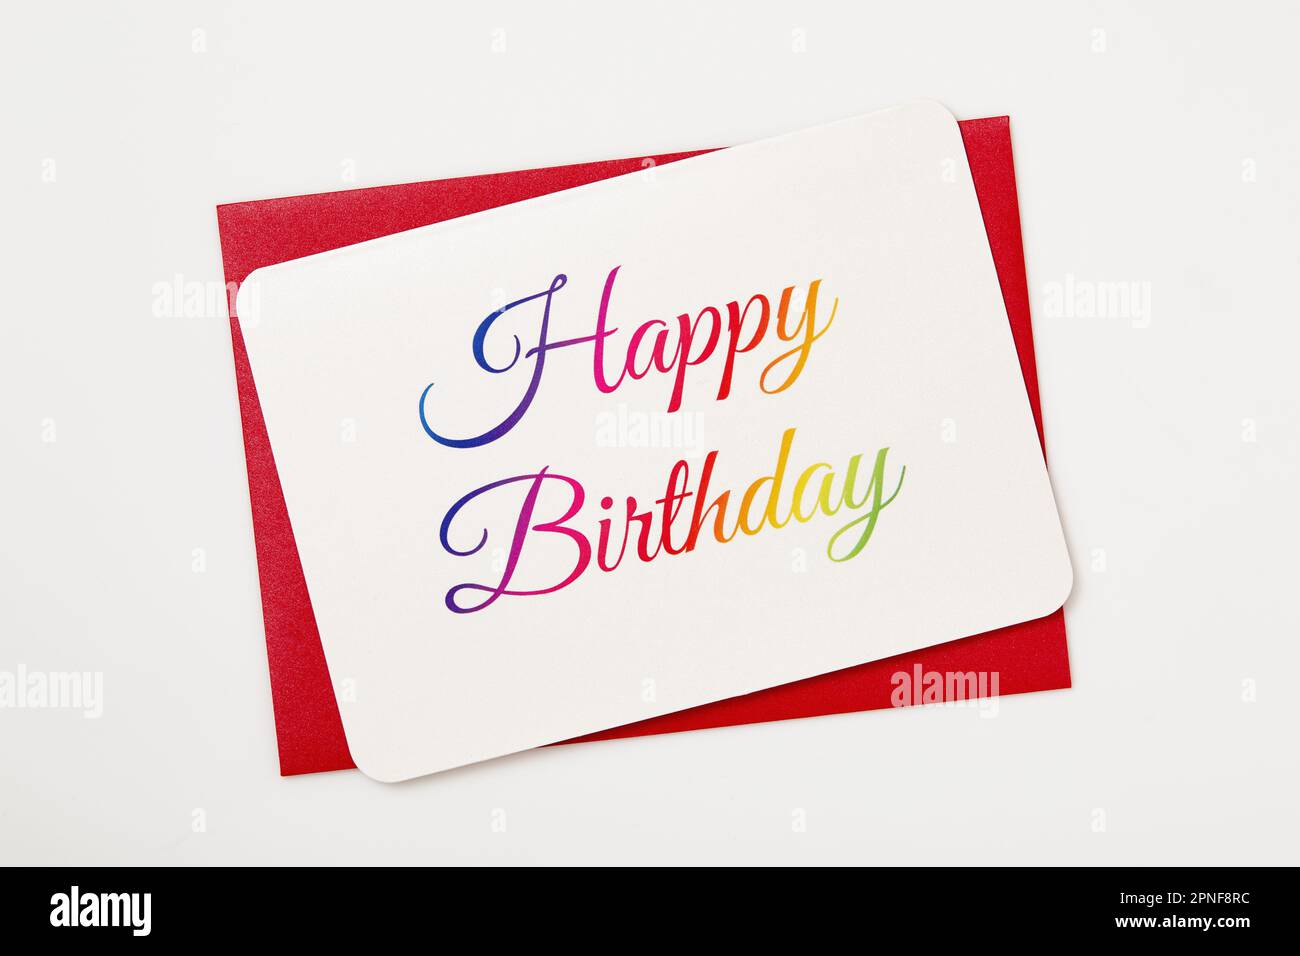 Colorful Happy Birthday card on red envelope Stock Photo